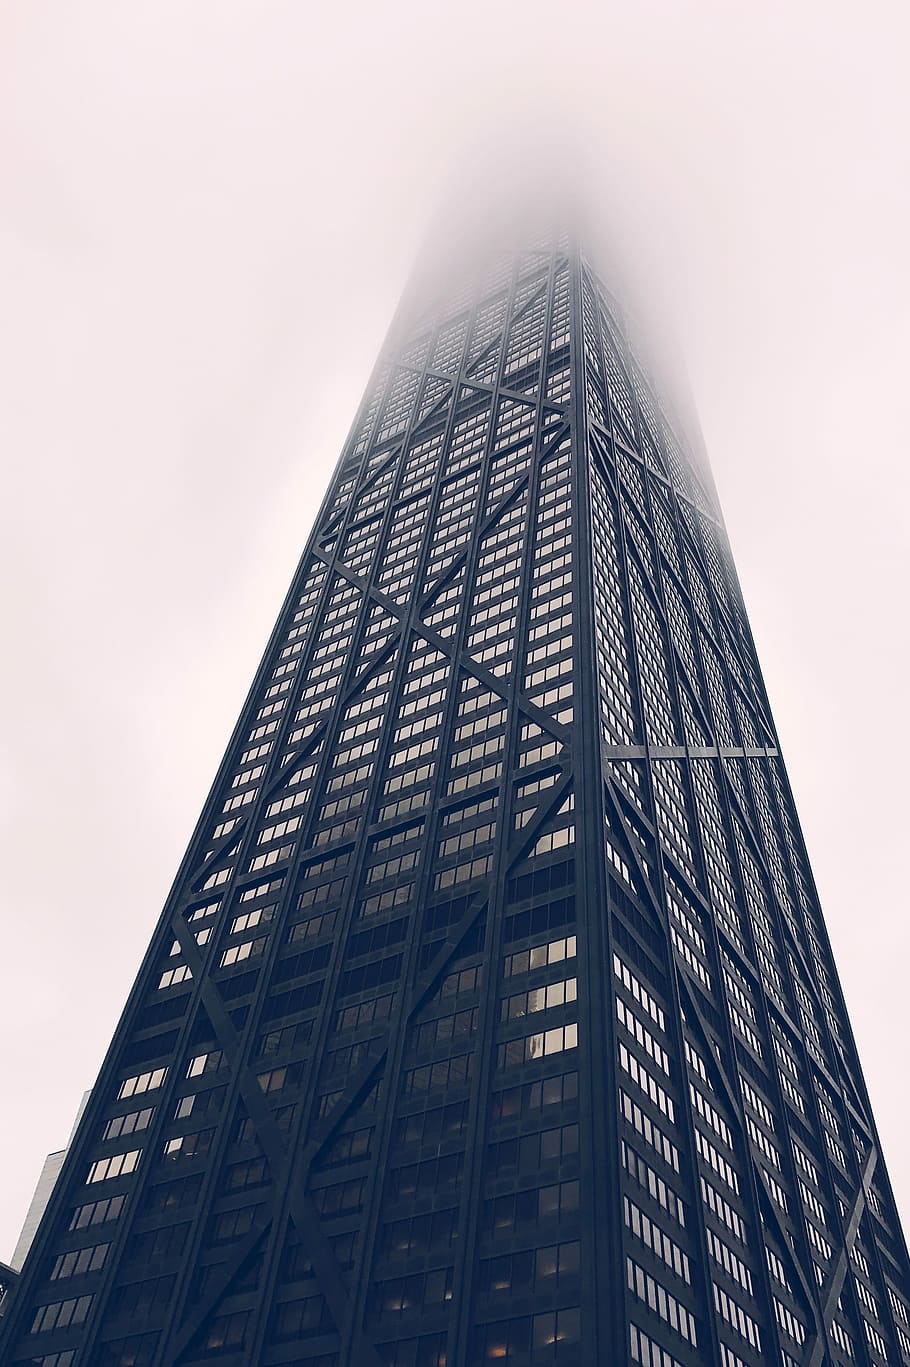 Disappearing Skyscrapers, low angle photography of building, fog